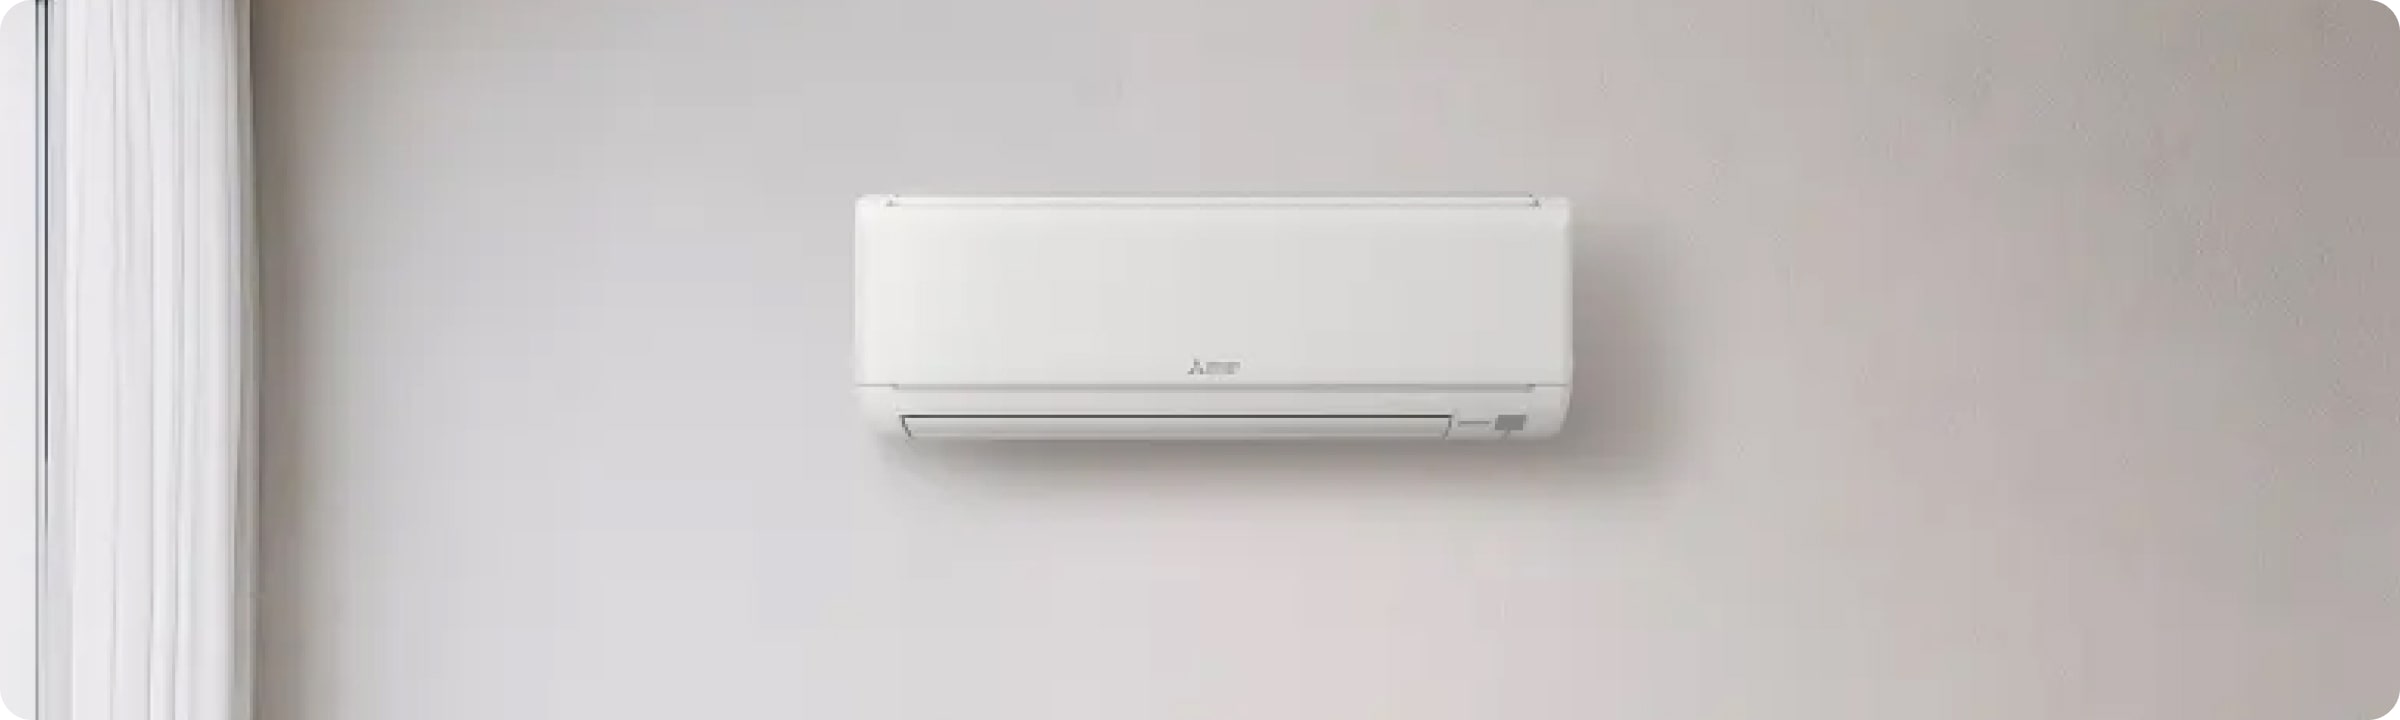 How to install Wall-Mounted Split Air Conditioner Air Conditioner